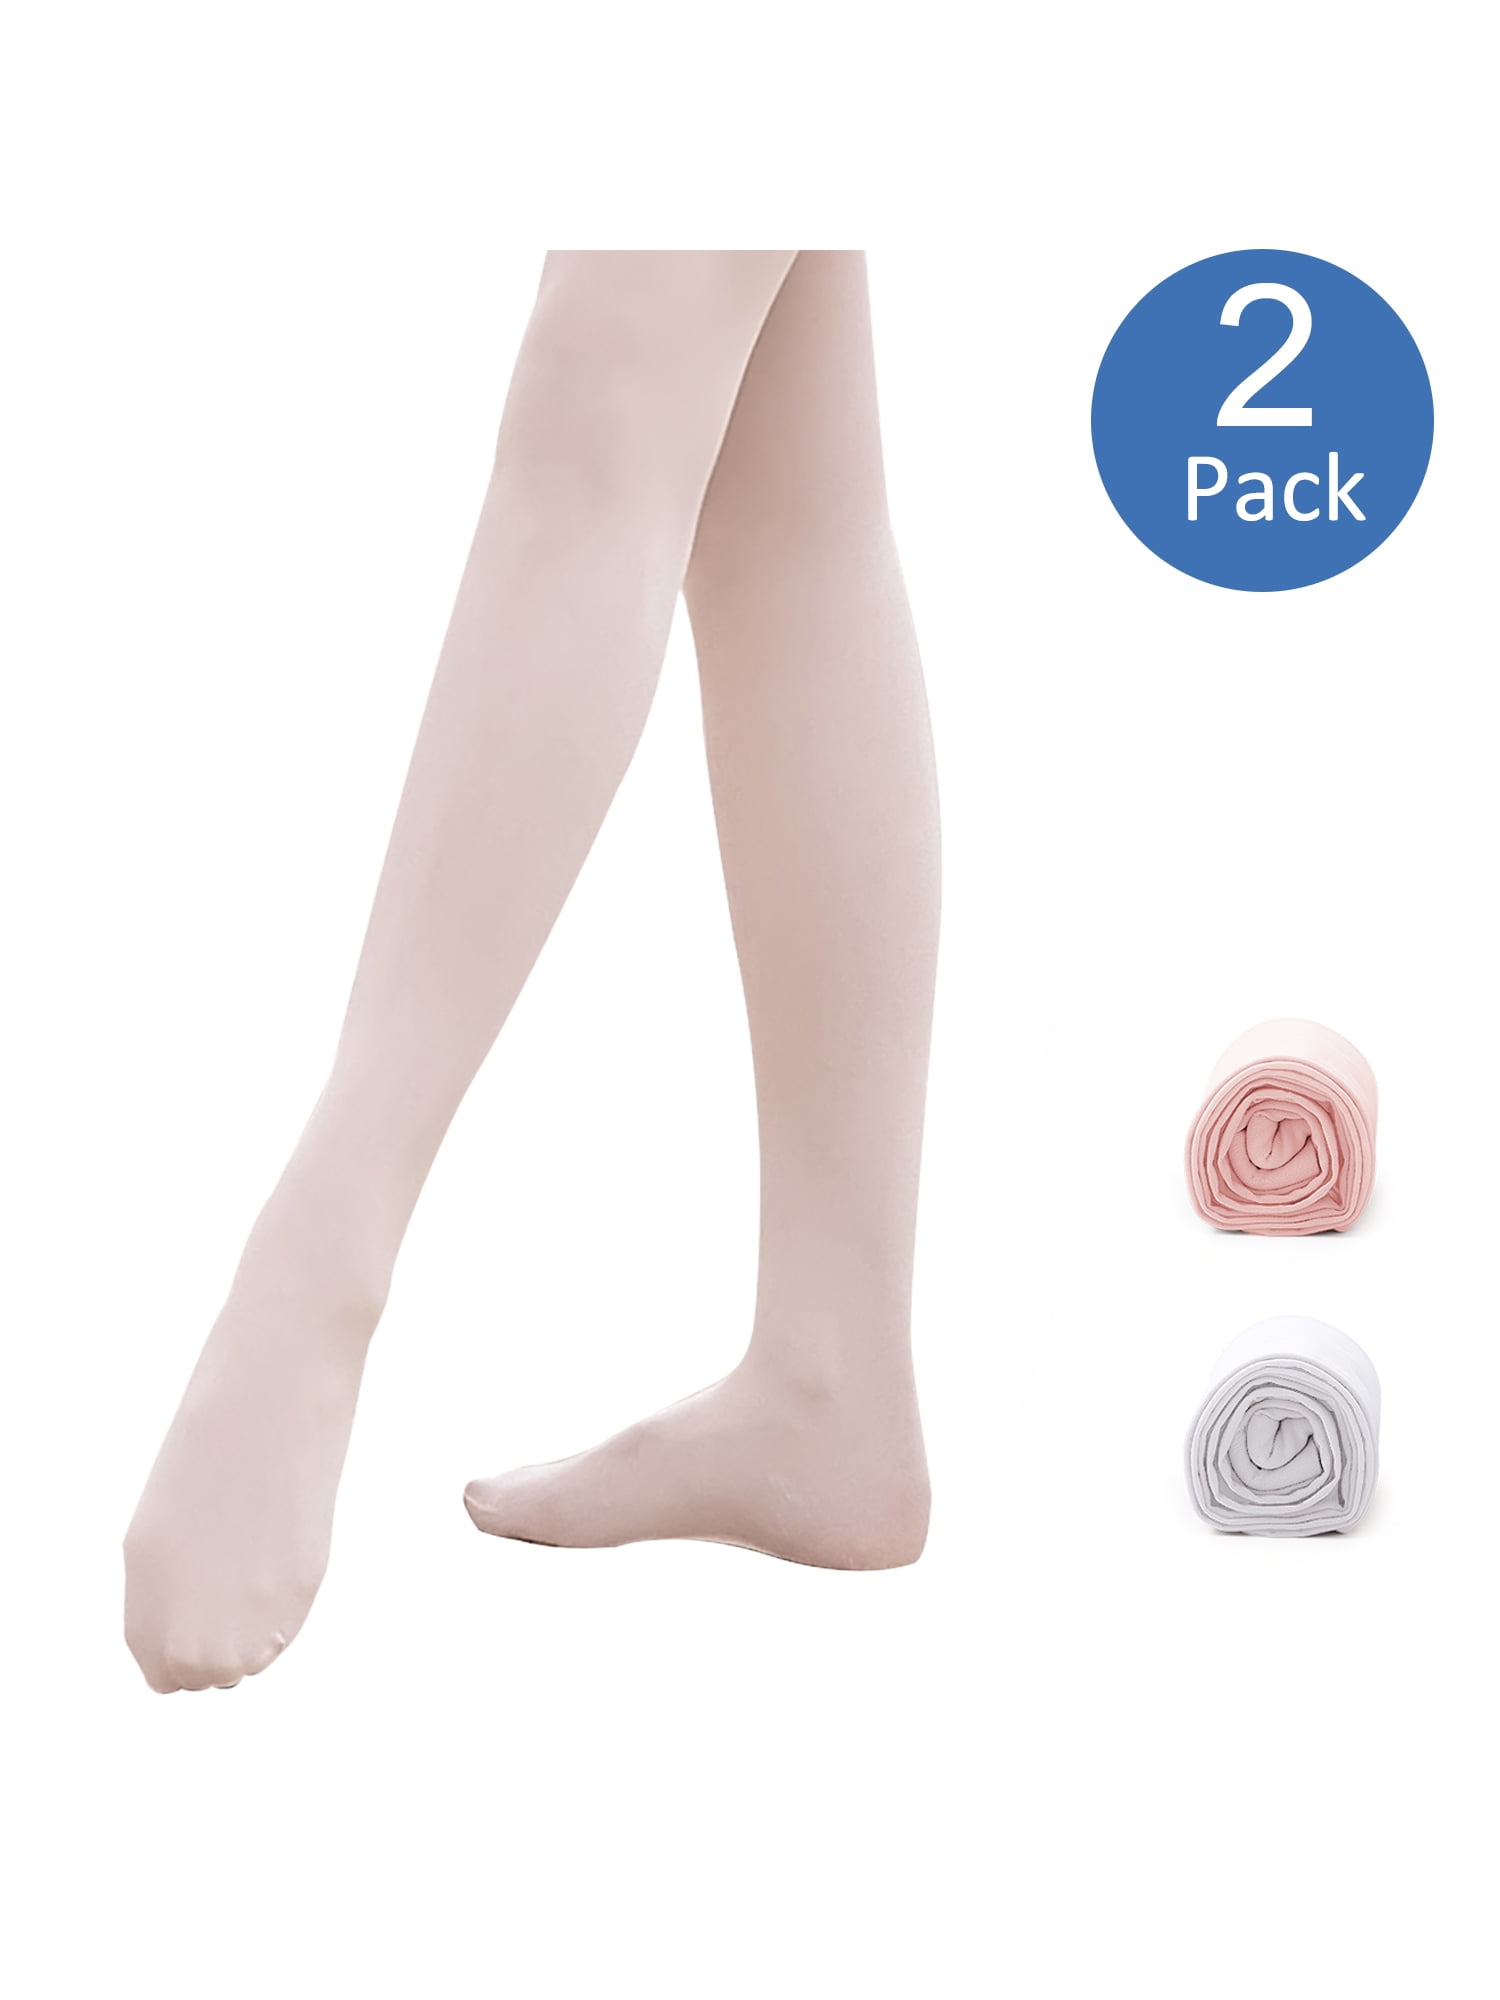 vanberfia 3 Pack Girls Footed Dance Tights Ballet Class School Outfits Stretchy Tights 3-10T 